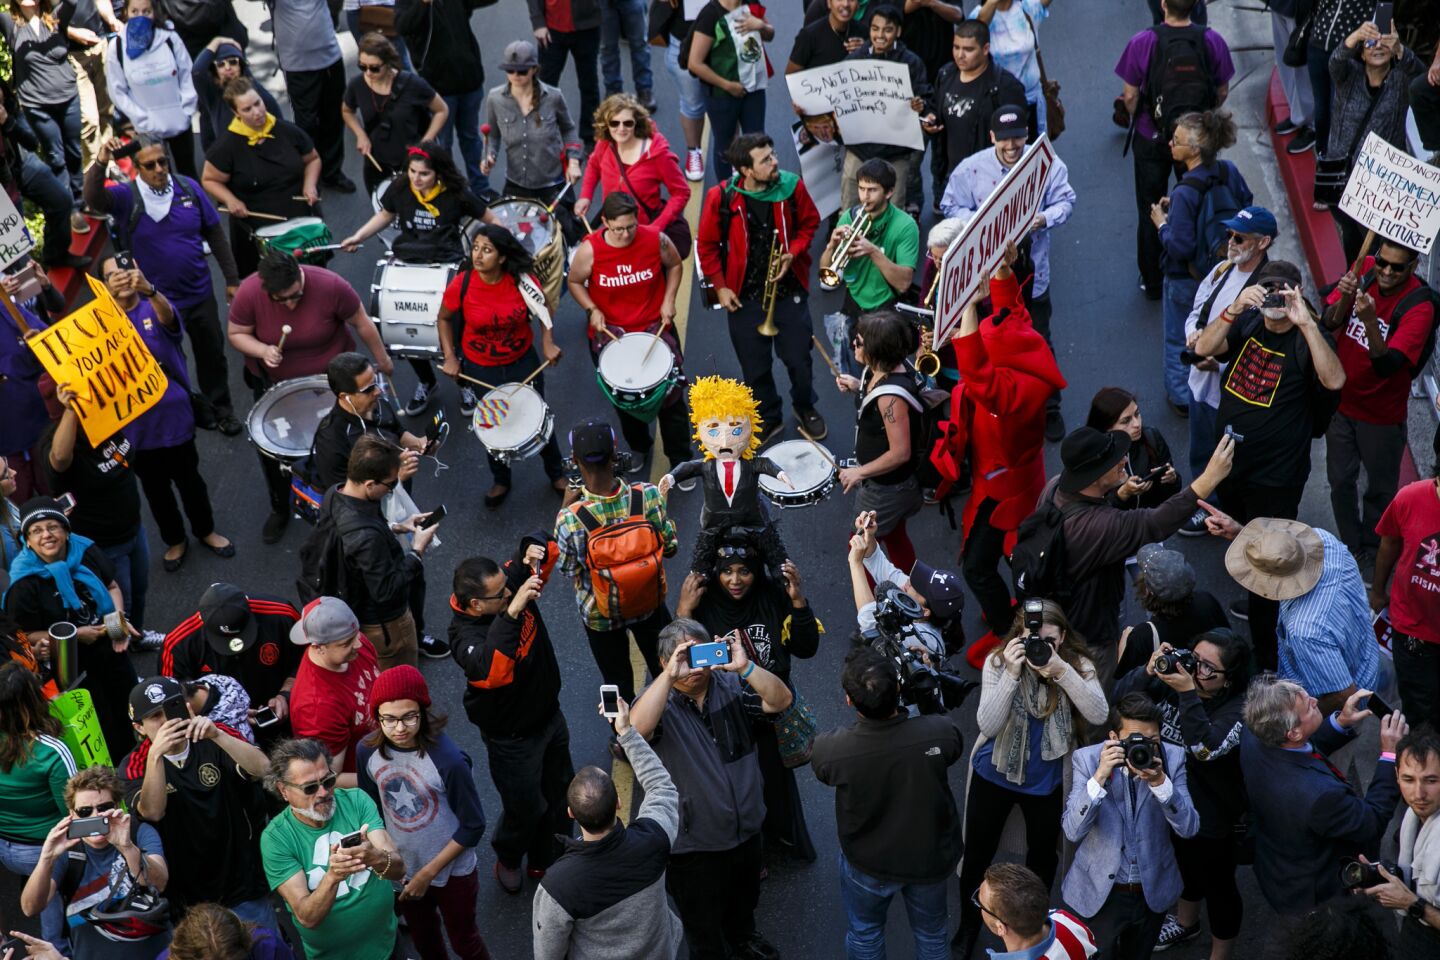 Trump protesters fill the streets outisde the California Republican Convention.